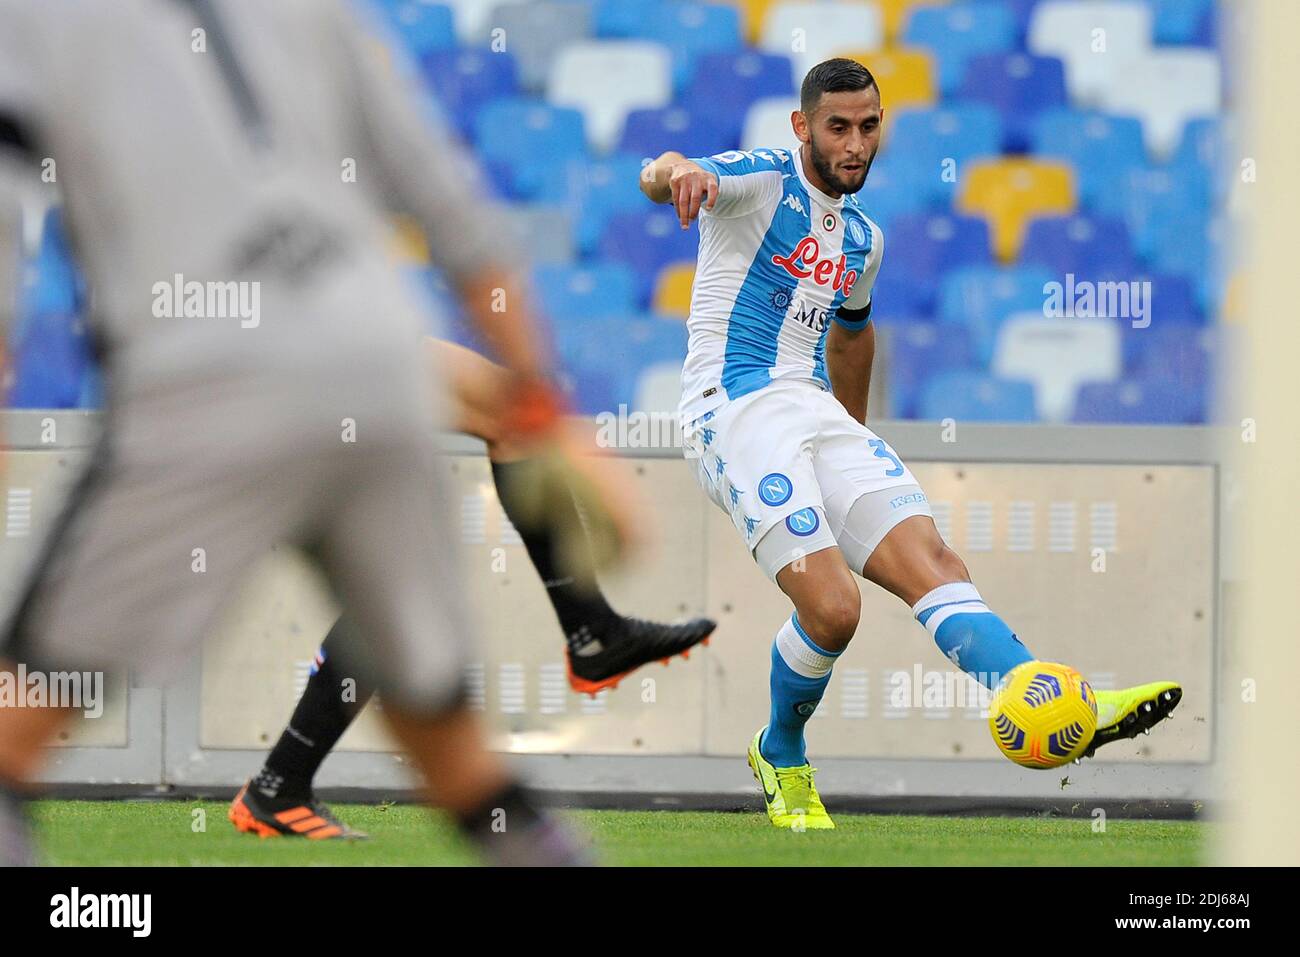 Napoli, Italy. 13th Dec, 2020. Faouzi Ghoulam player of Napoli, during the match of the Italian football league between Napoli vs Sampdoria final result 2-1, match played at the Diego Armando Maradona stadium in Naples. Italy, December 13, 2020. (Photo by Vincenzo Izzo/Sipa USA) Credit: Sipa USA/Alamy Live News Stock Photo